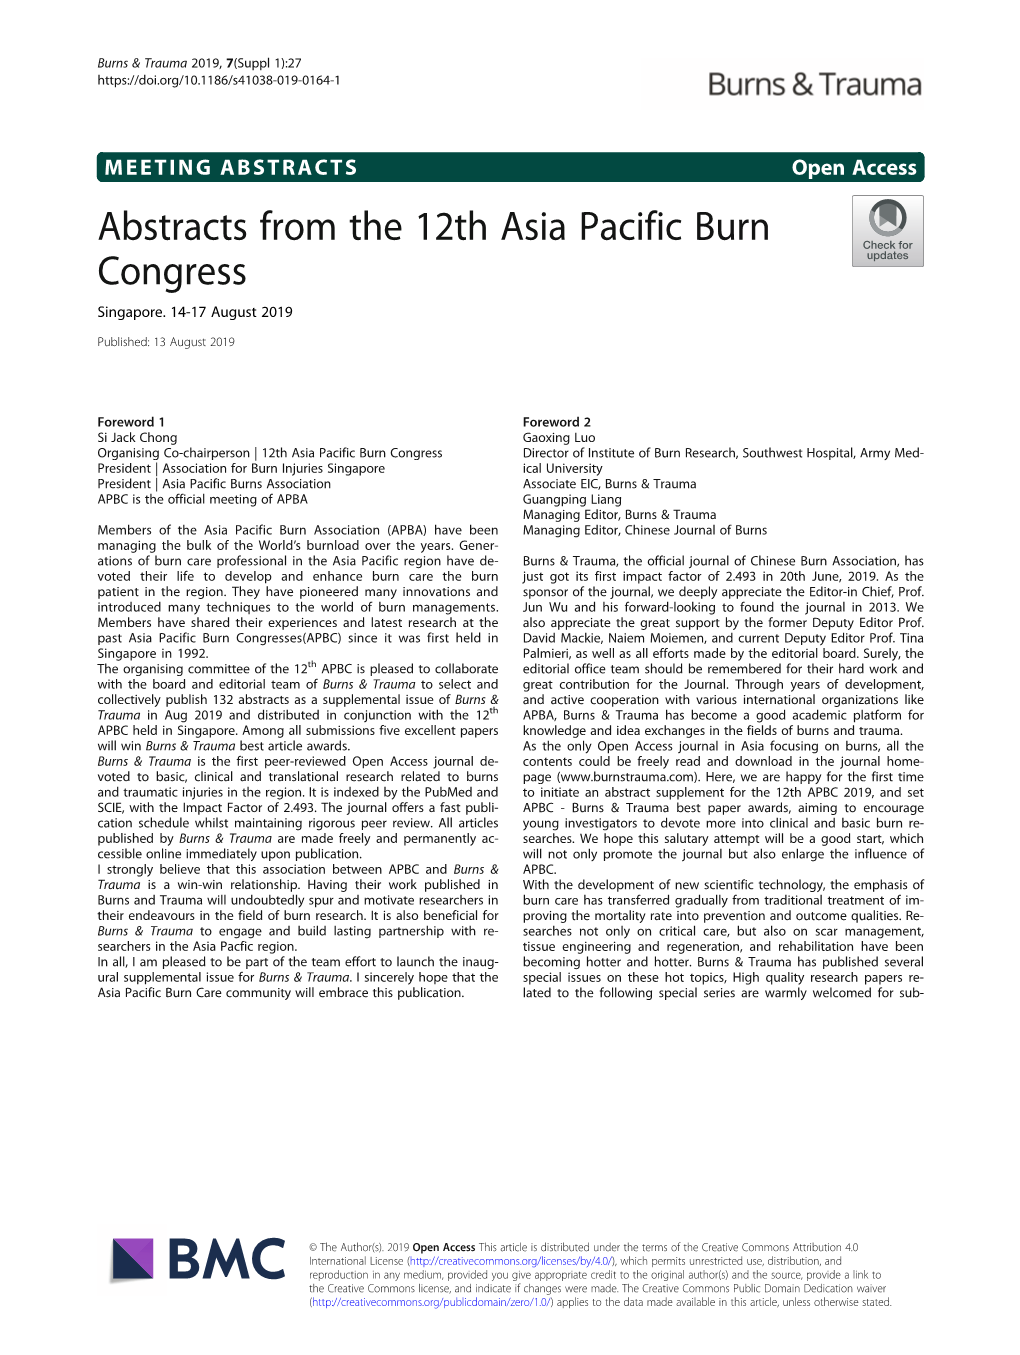 Abstracts from the 12Th Asia Pacific Burn Congress Singapore